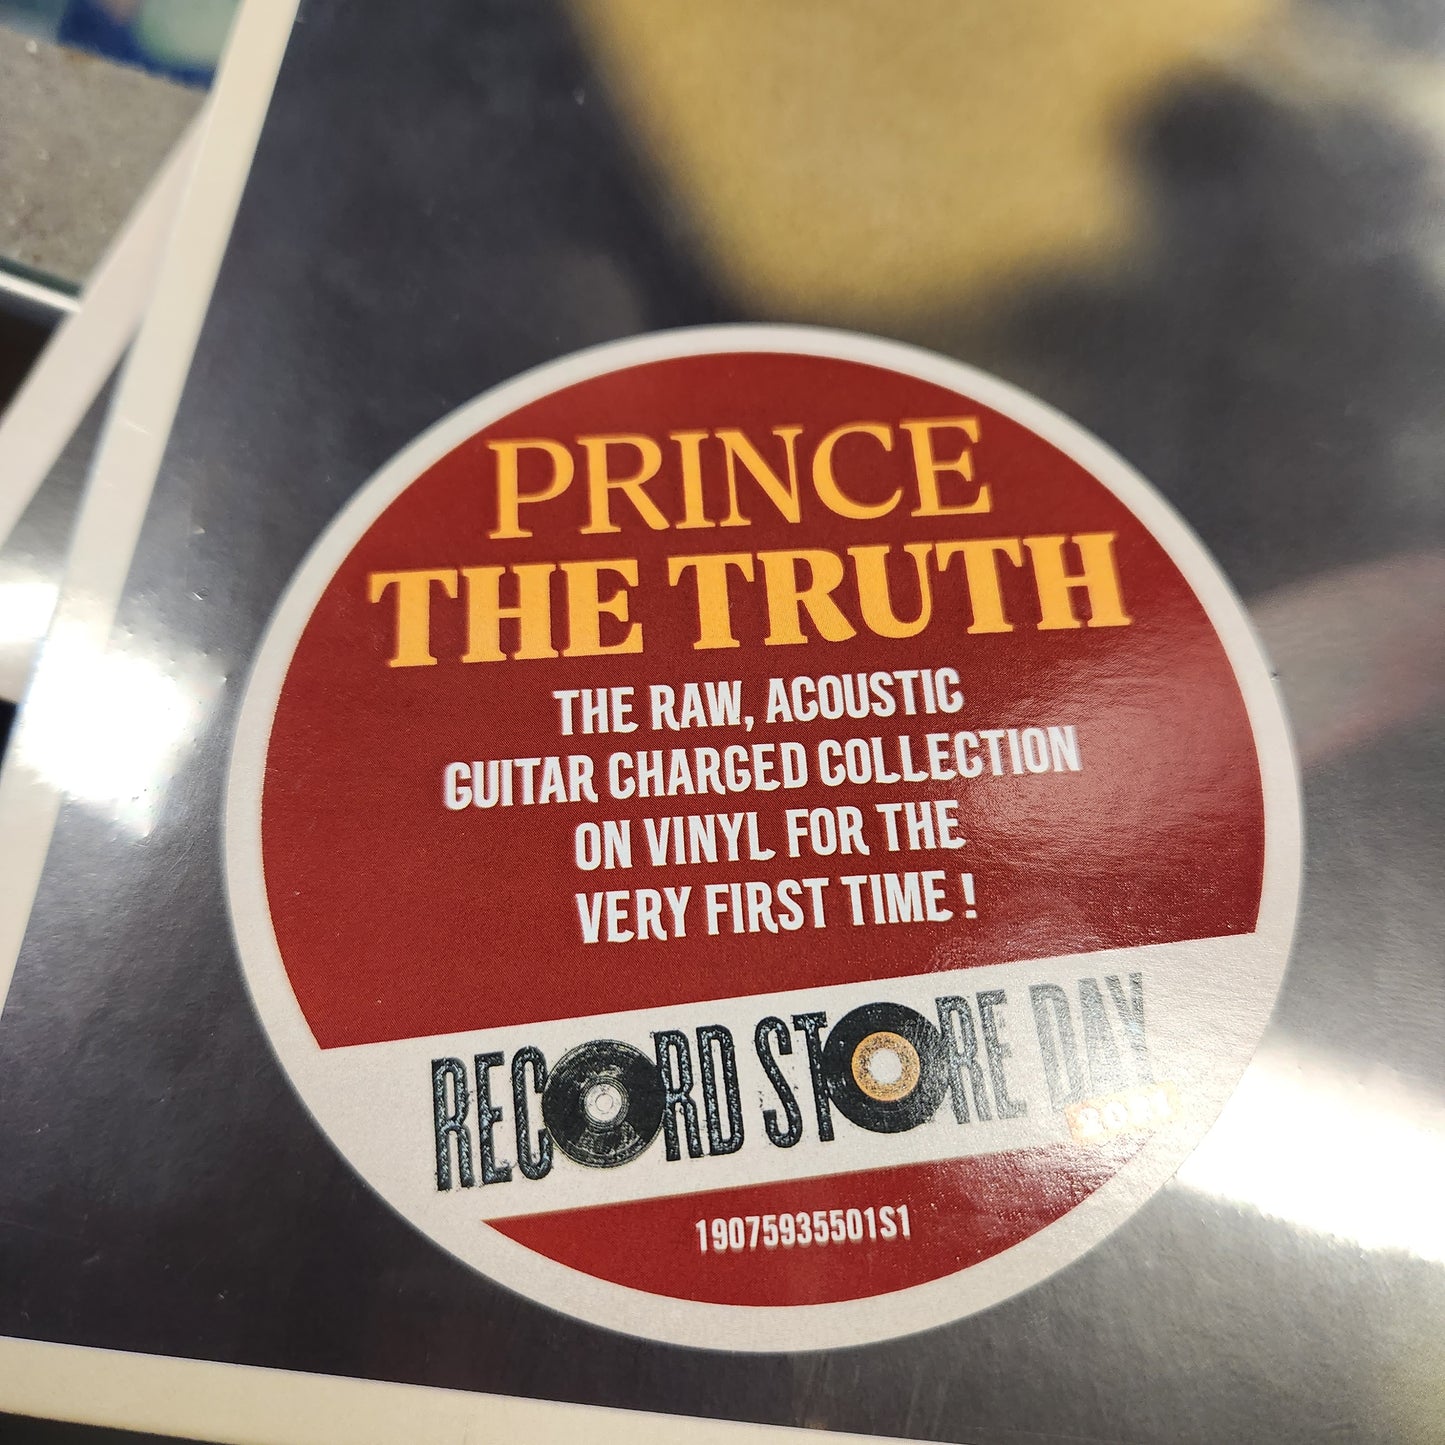 NEW - Prince, The Truth LP RSD